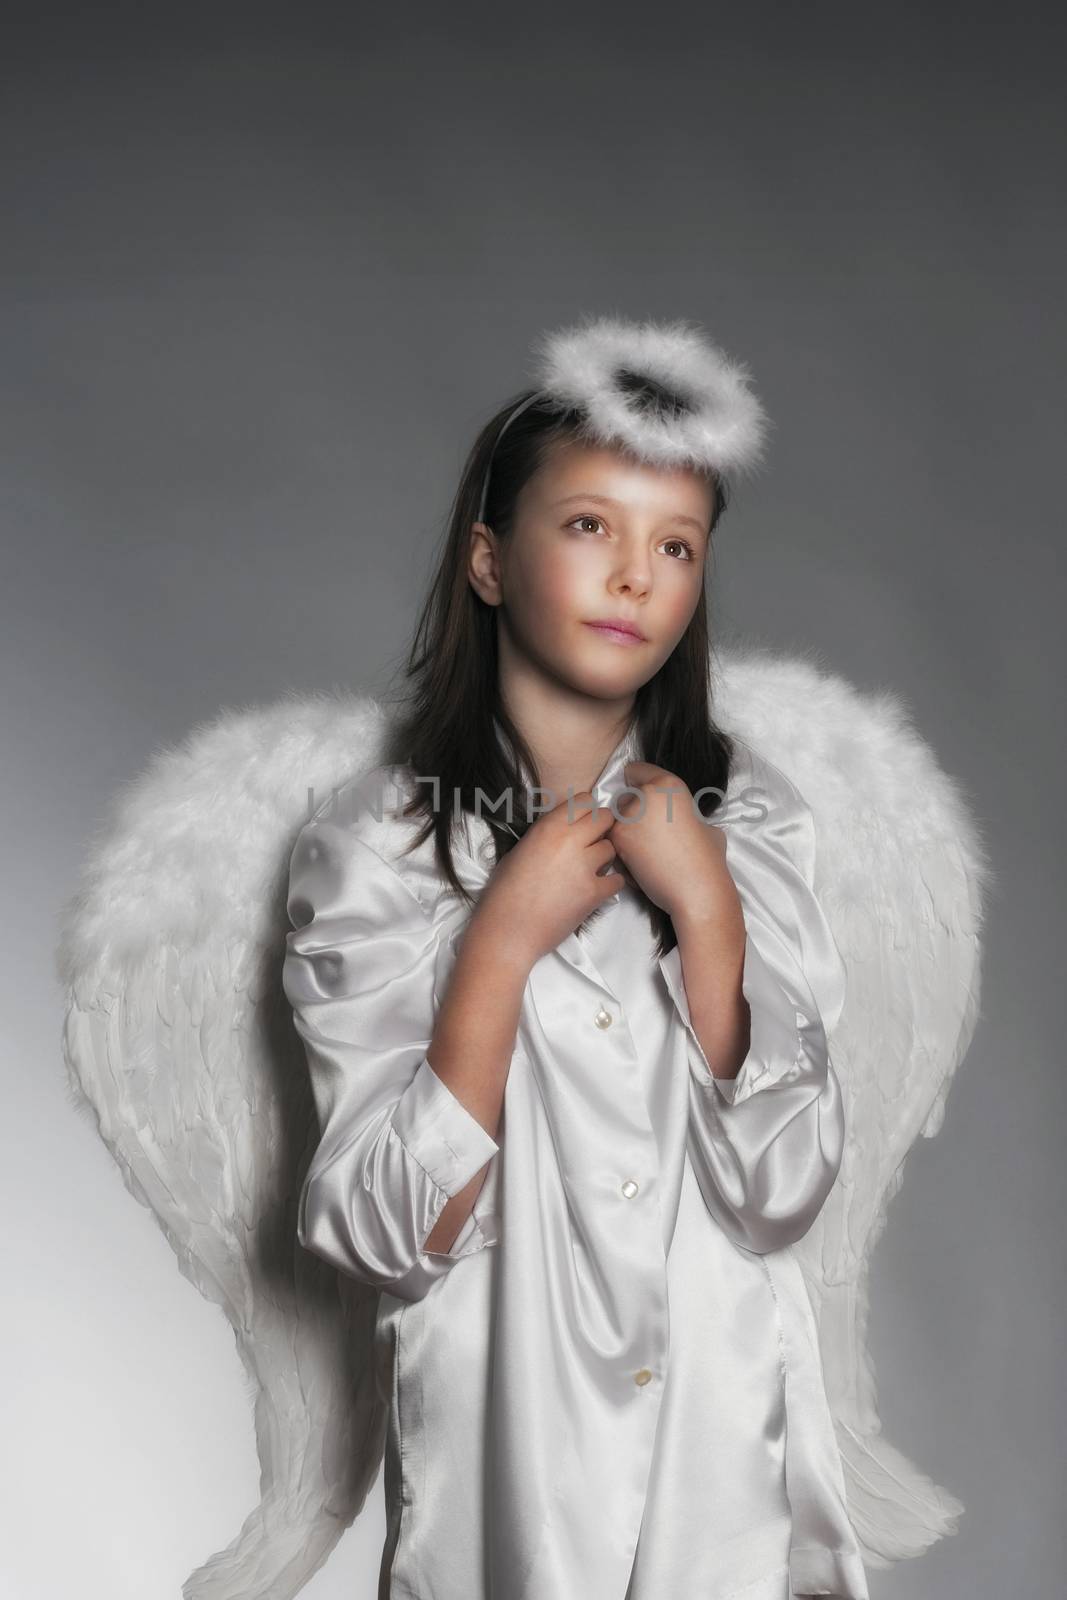 studio portrait of an eleven years old girl dressed as angel